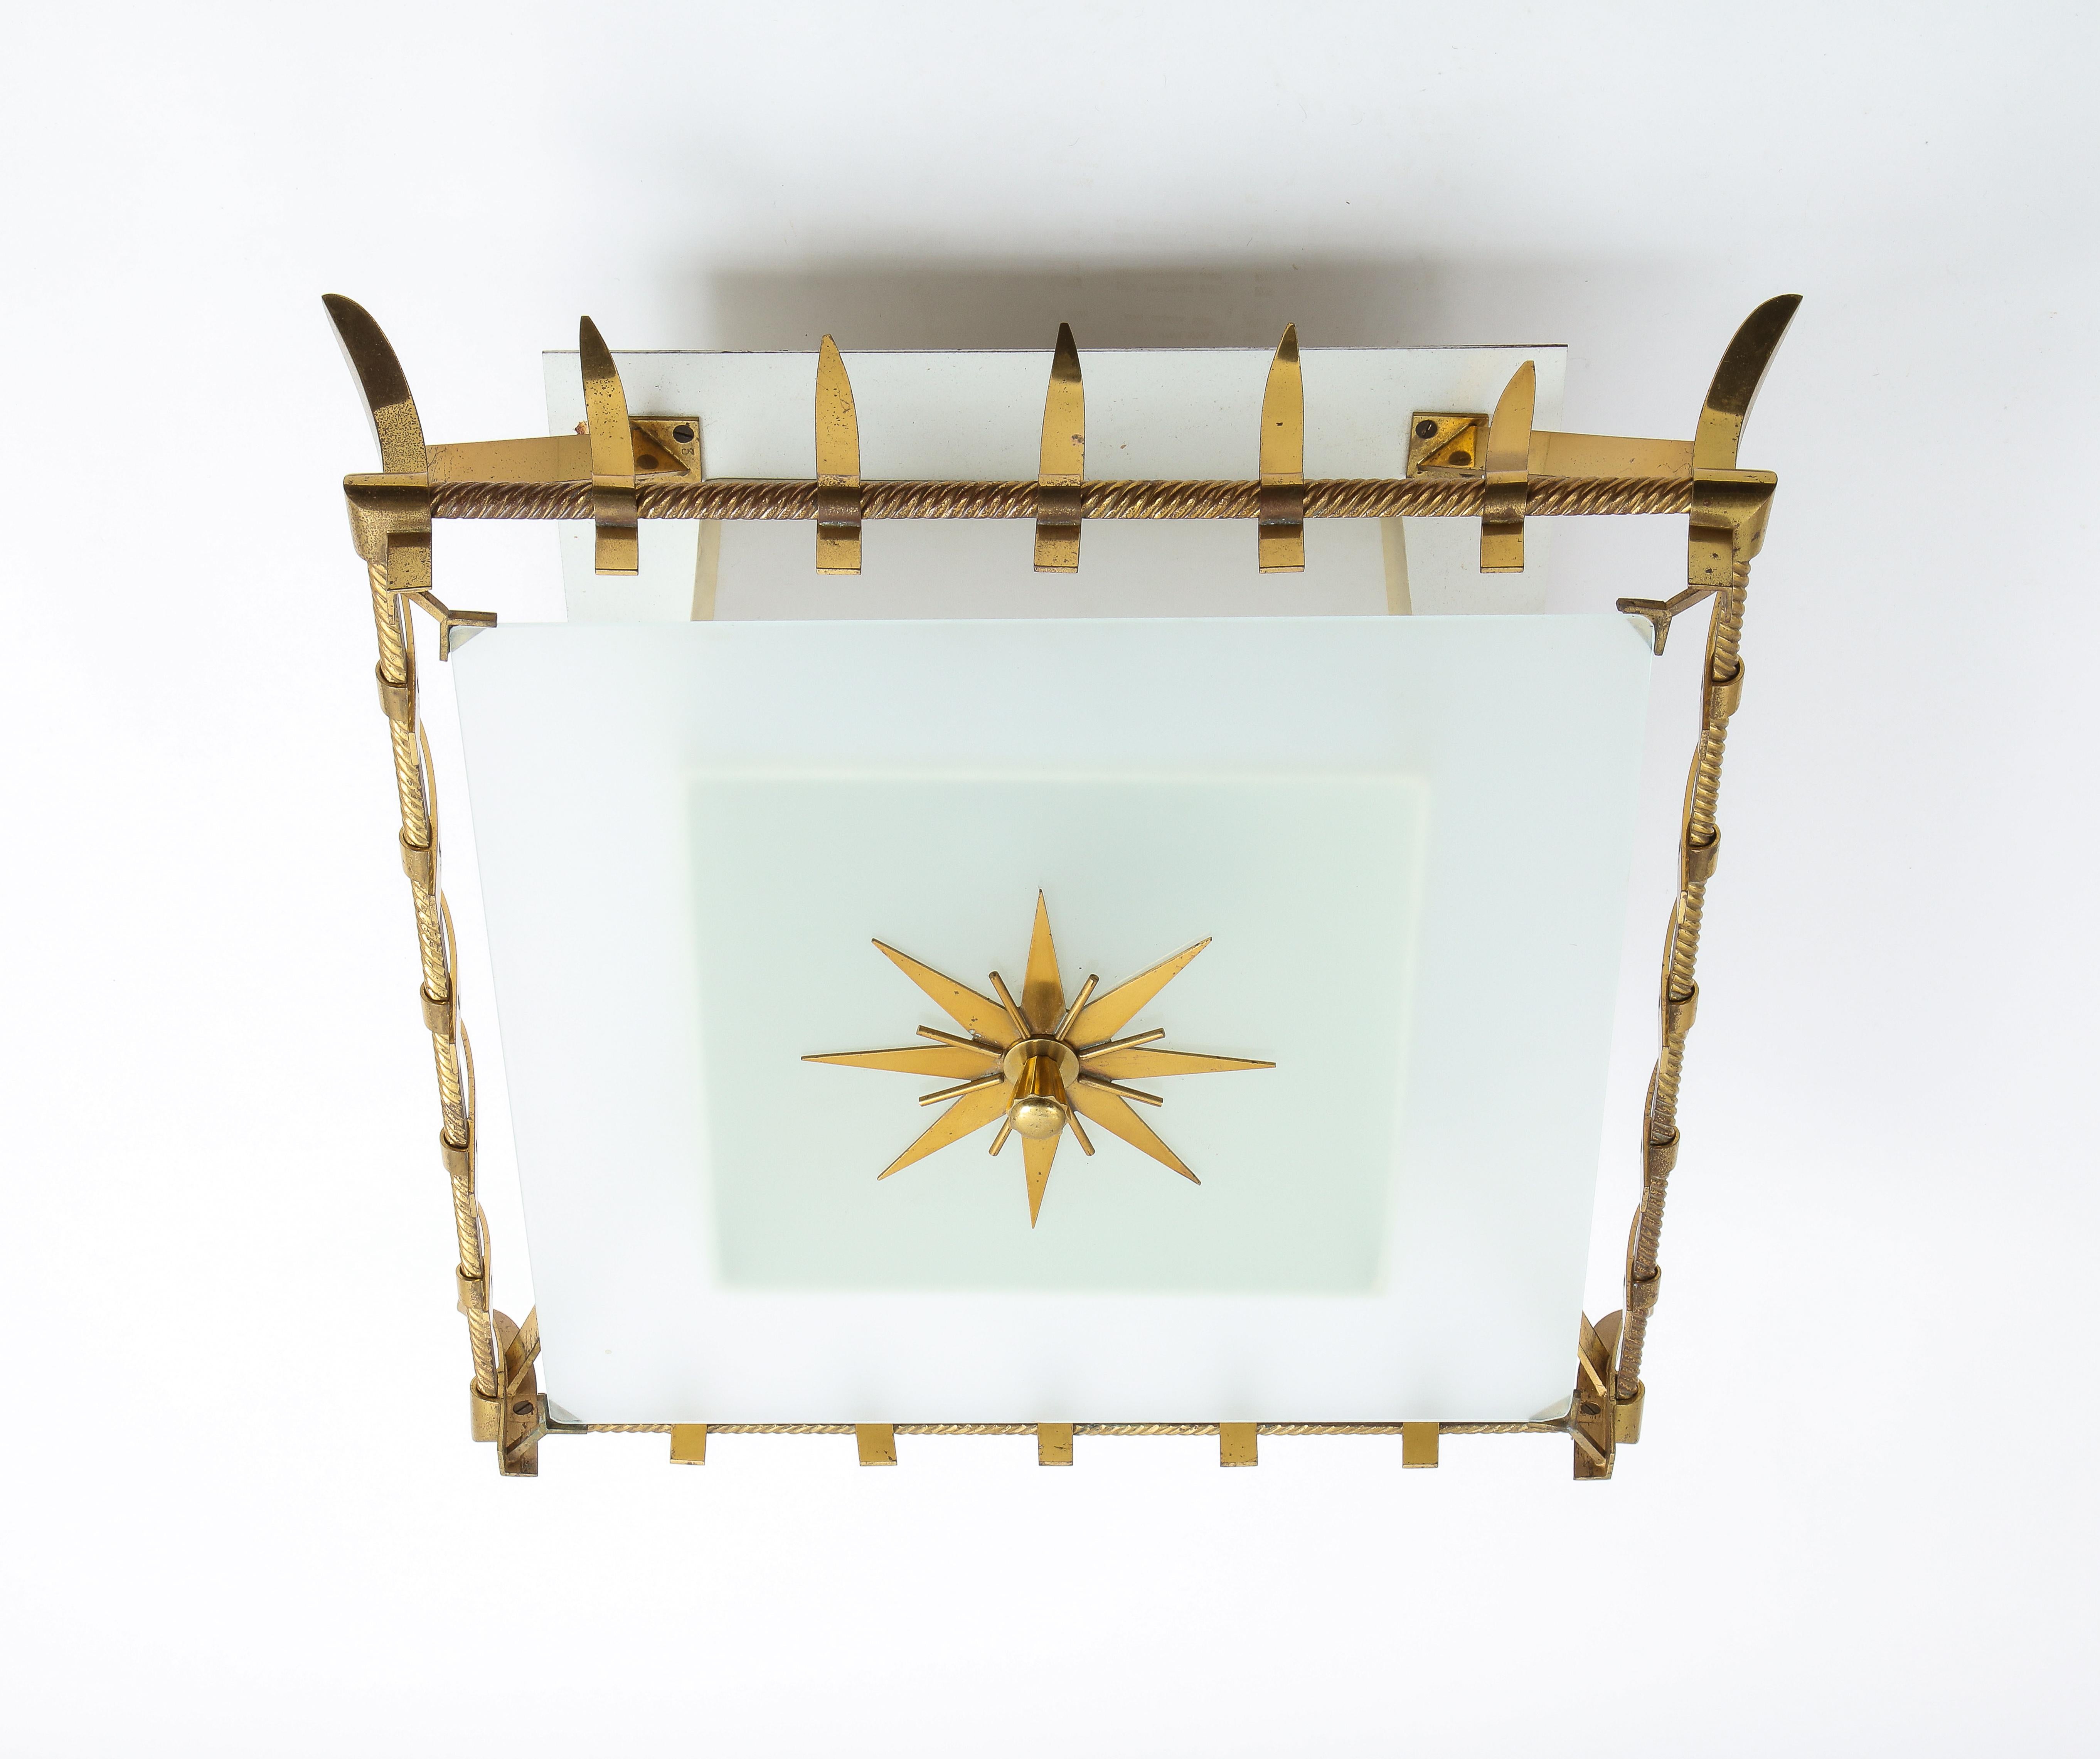 Wonderful bronze and glass fixture by Sabino, the ornate frame is made of bronze and supports a glass diffuser fastened by a large bronze star. Rewired.